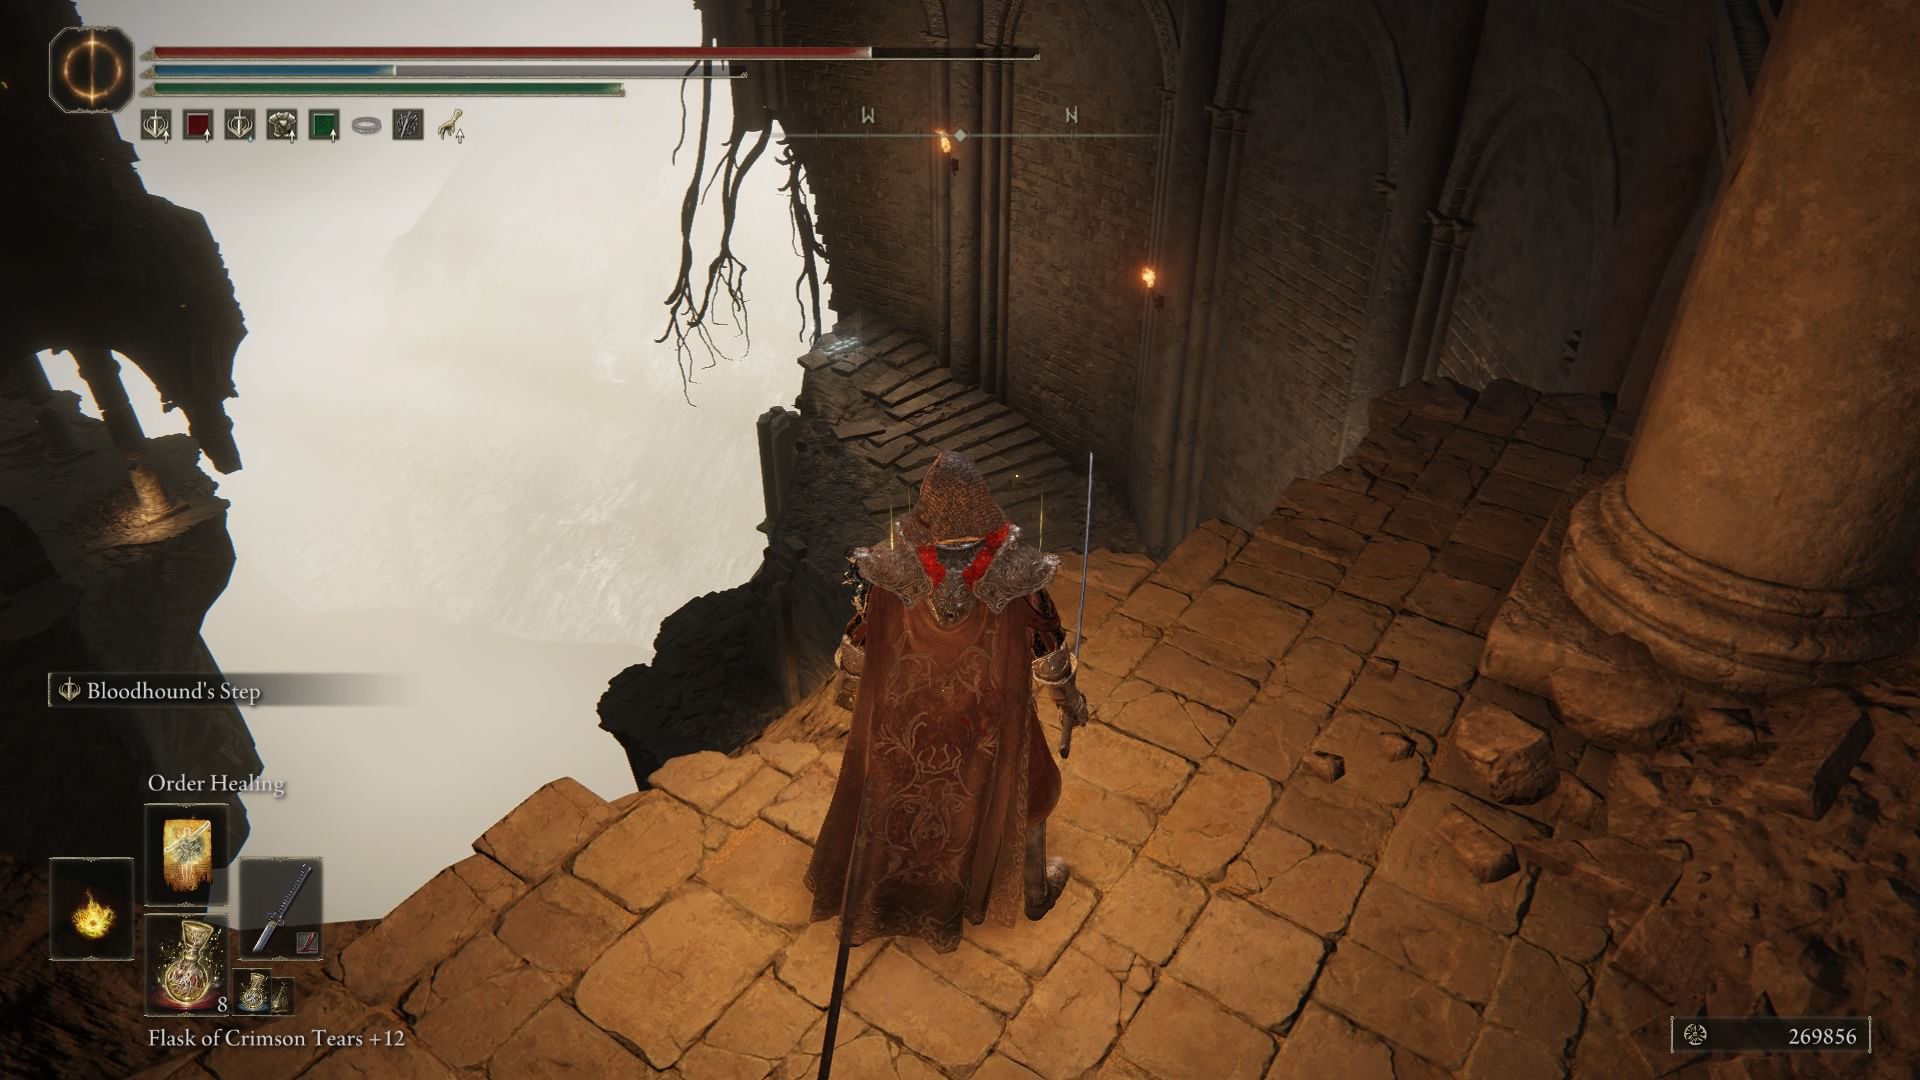 The player looking at the set of stairs.